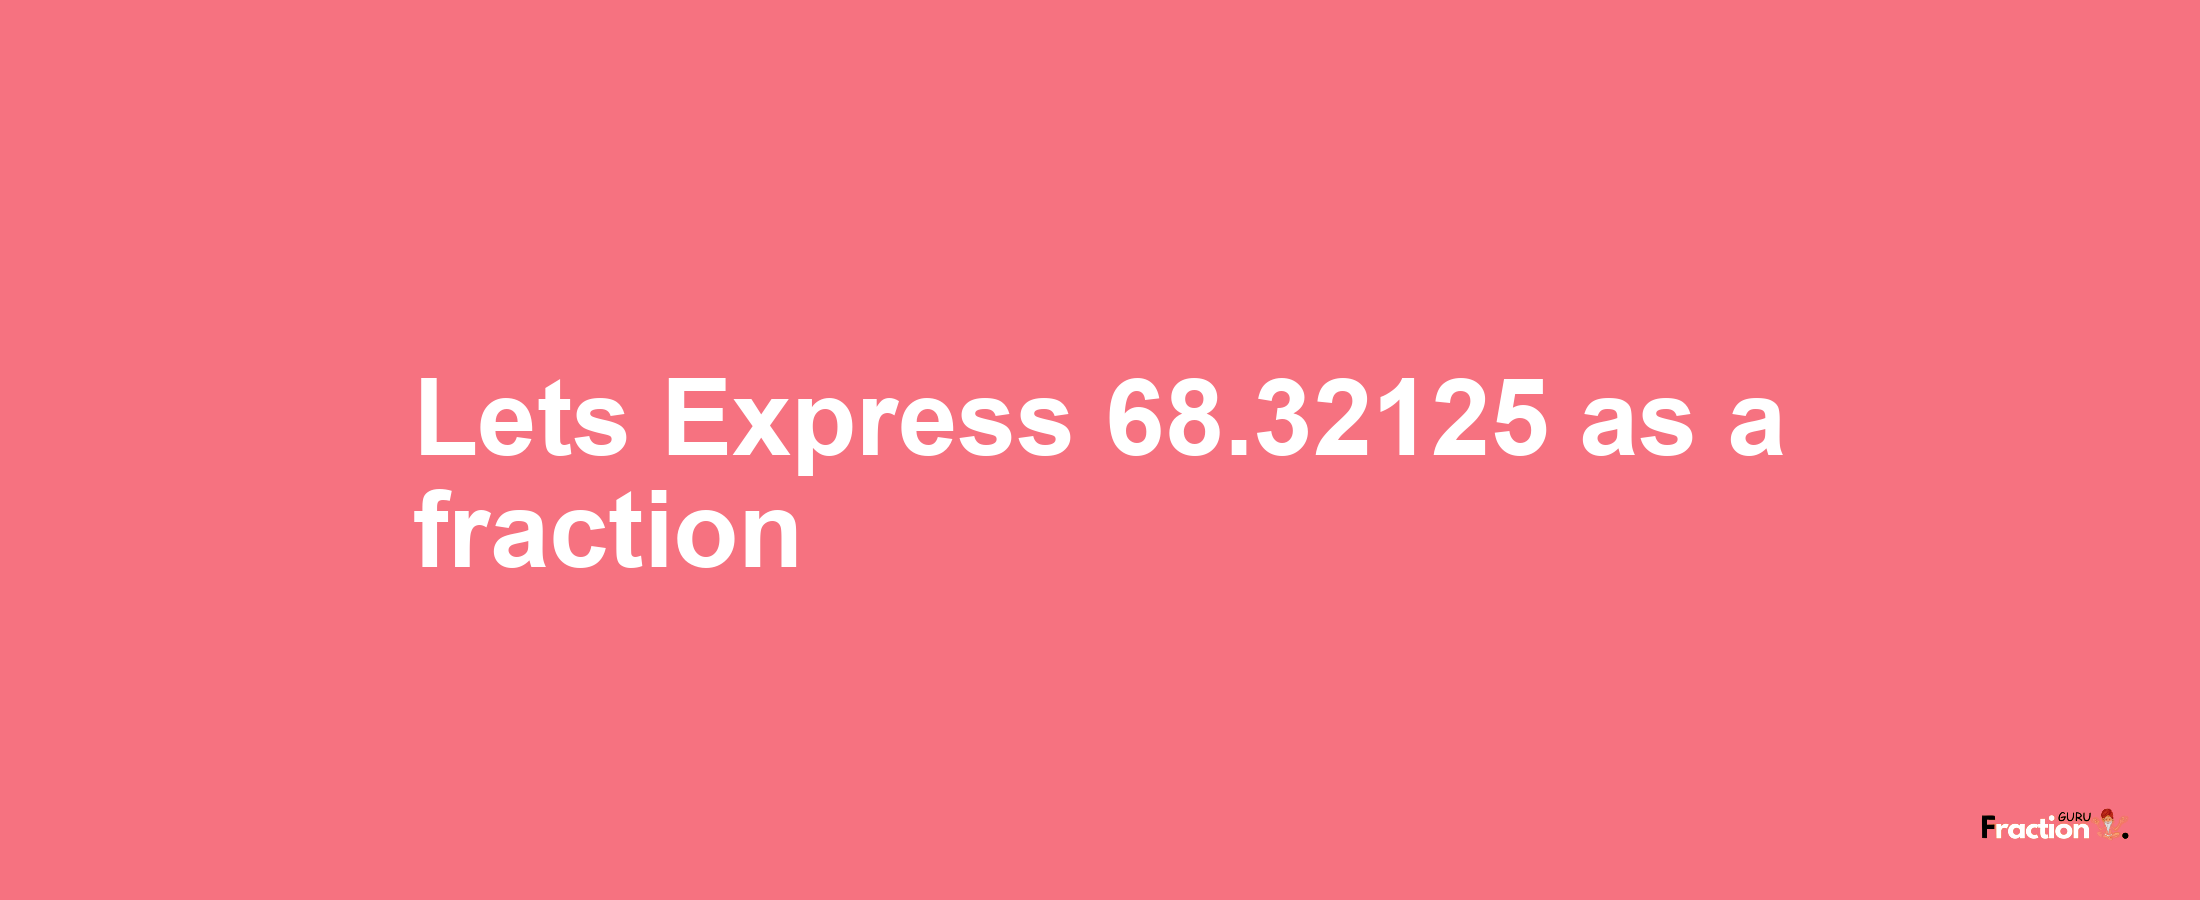 Lets Express 68.32125 as afraction